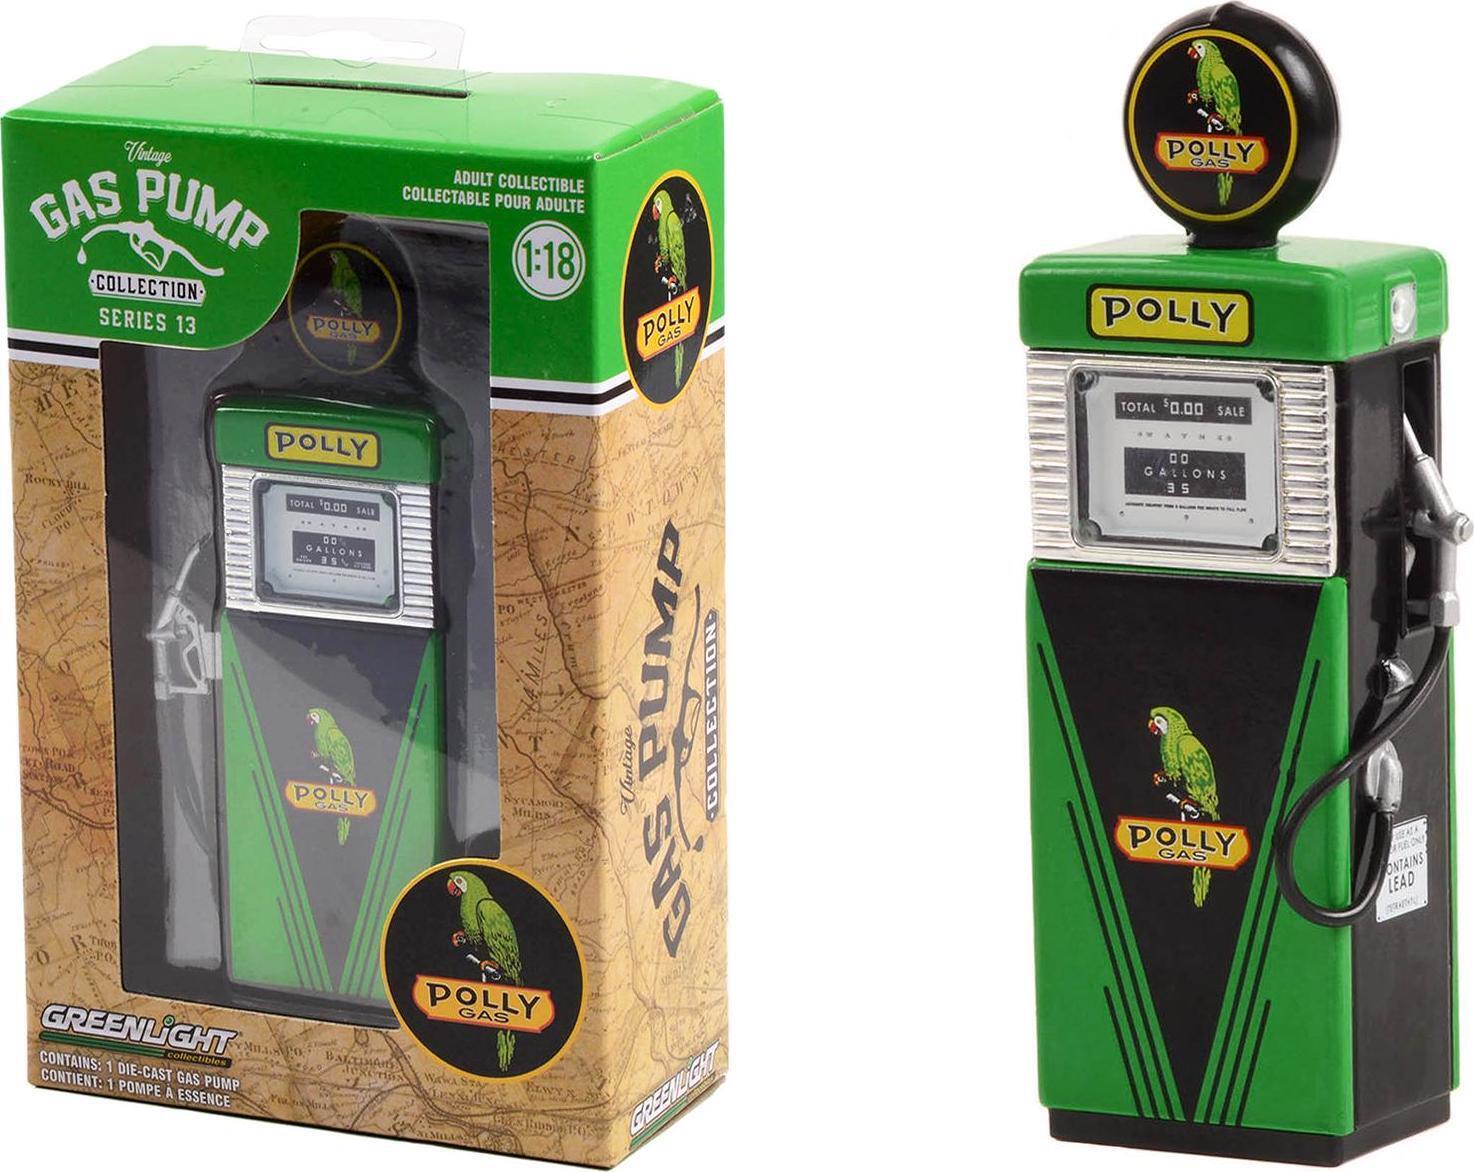 1951 Wayne 505 Gas Pump Polly Gas Green And Black Vintage Gas Pumps Series 13 By